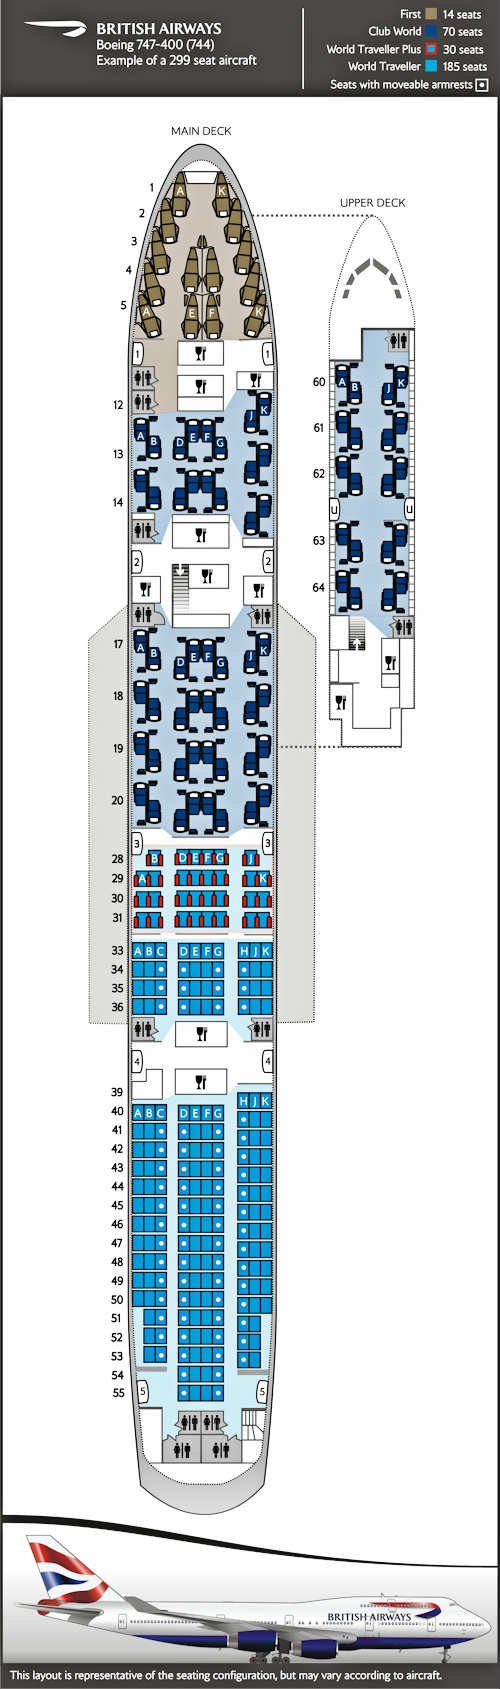 Seatmap for Boeing 747-400, 4 class 299 seat layout.